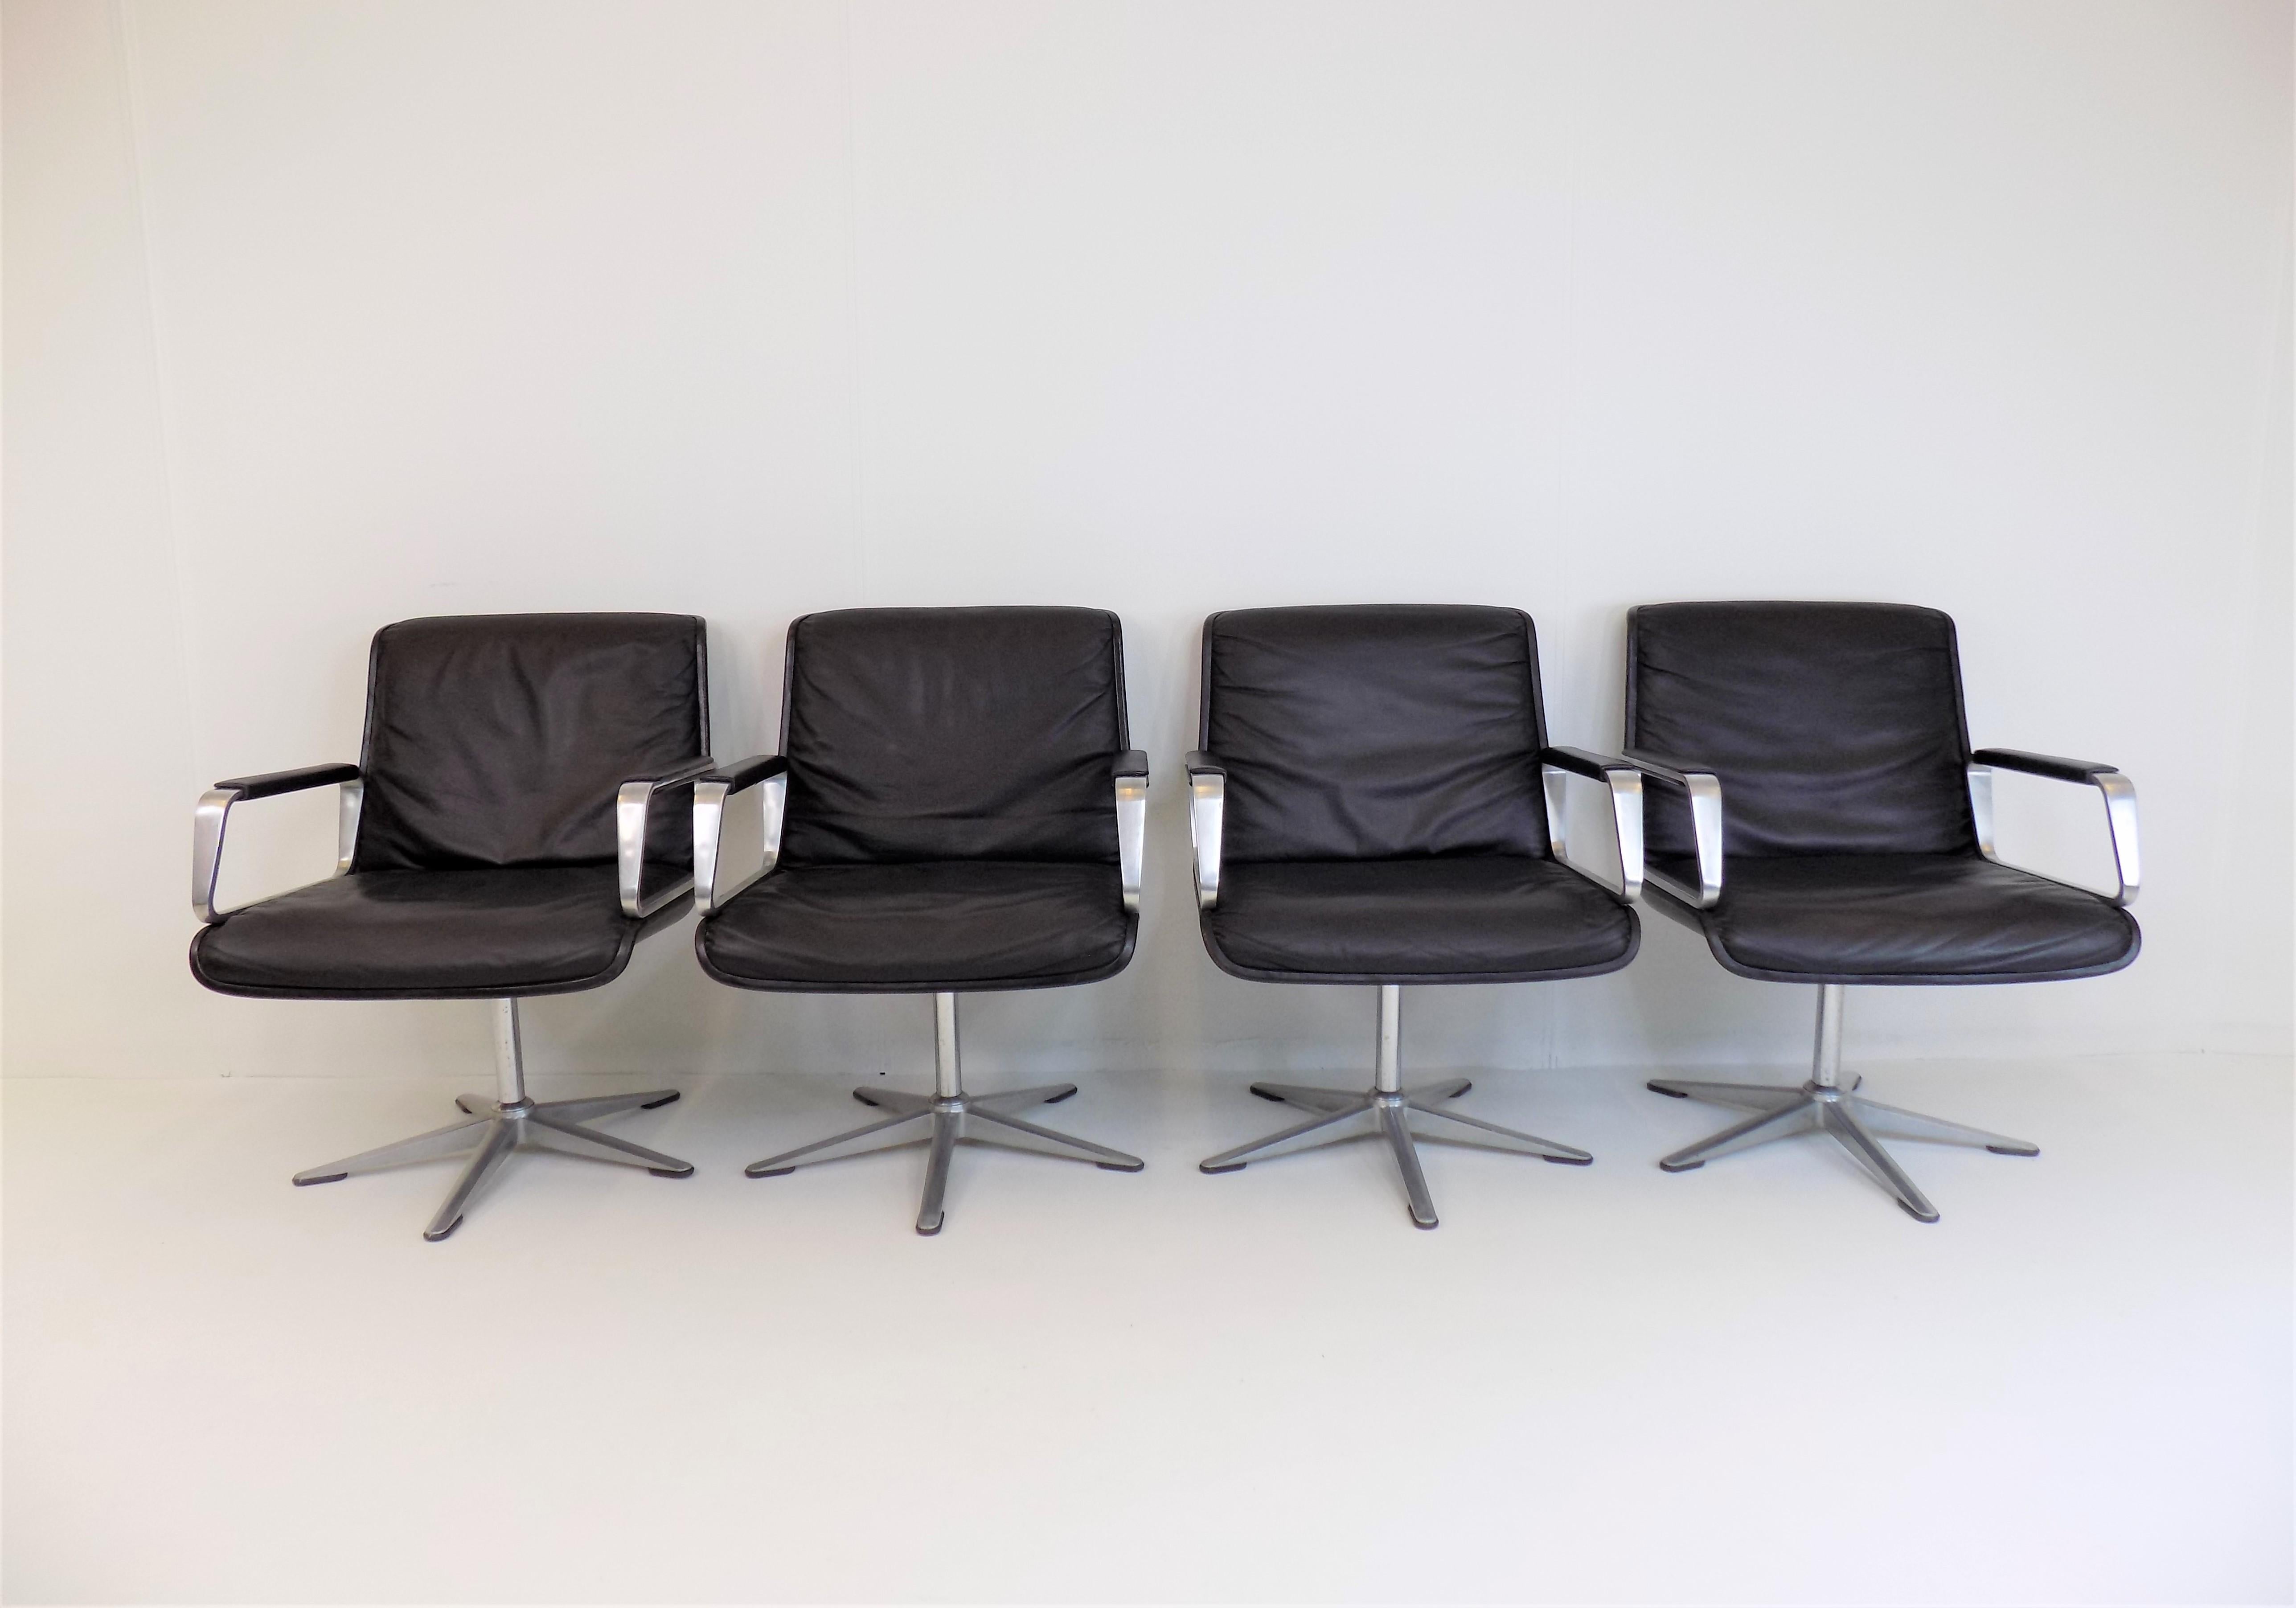 This set of 4 Wilkhahn Delta leather armchairs of the early generation, with brushed aluminum armrests with leather pads and with black shells, is in excellent condition. The leather is flawless, the plastic shells and the aluminum feet only have